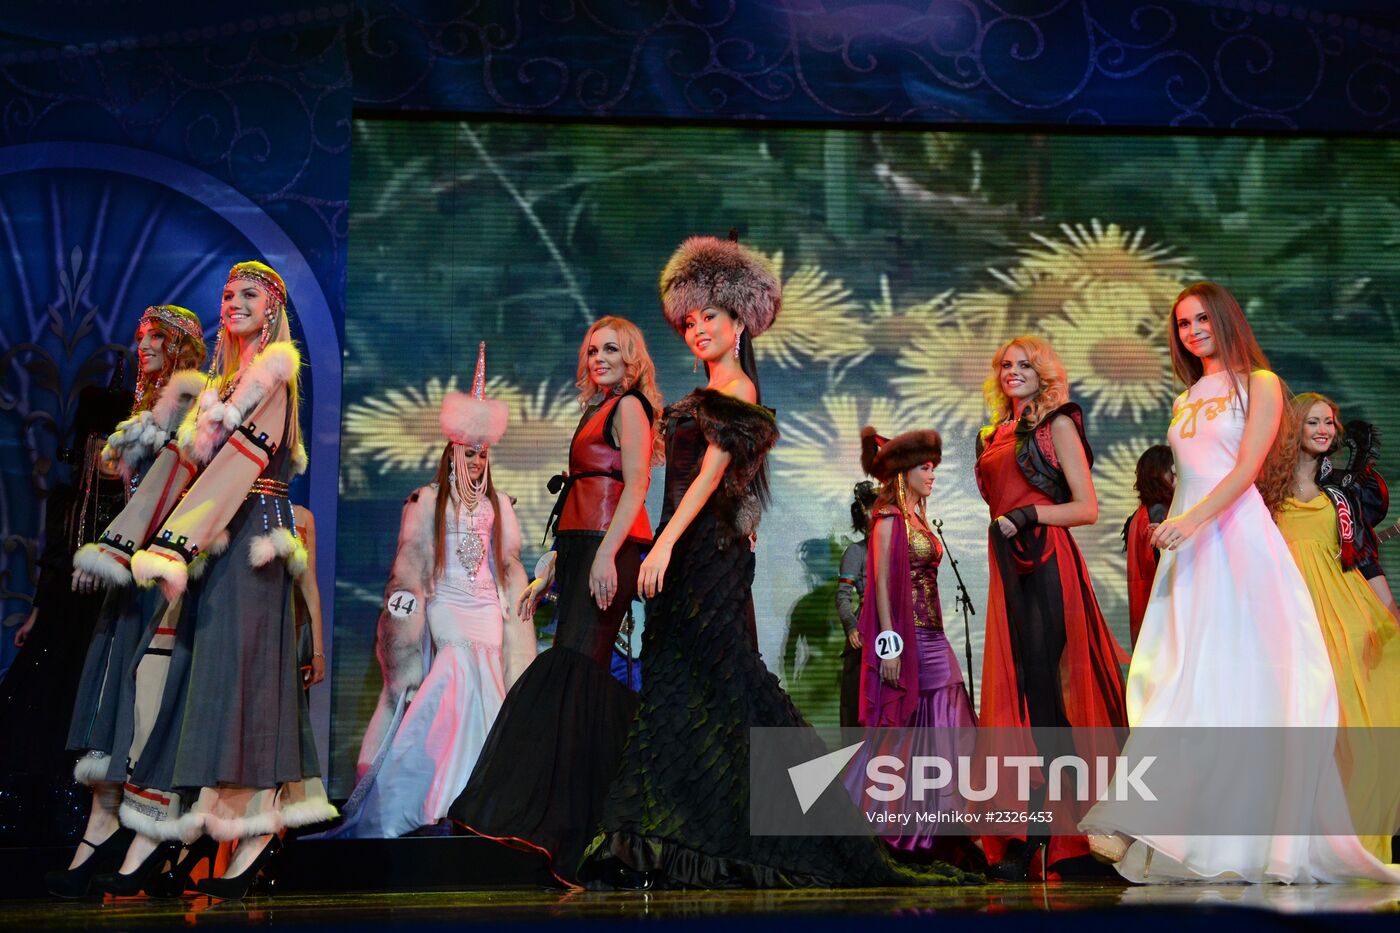 Finals of Russian Beauty 2013 contest